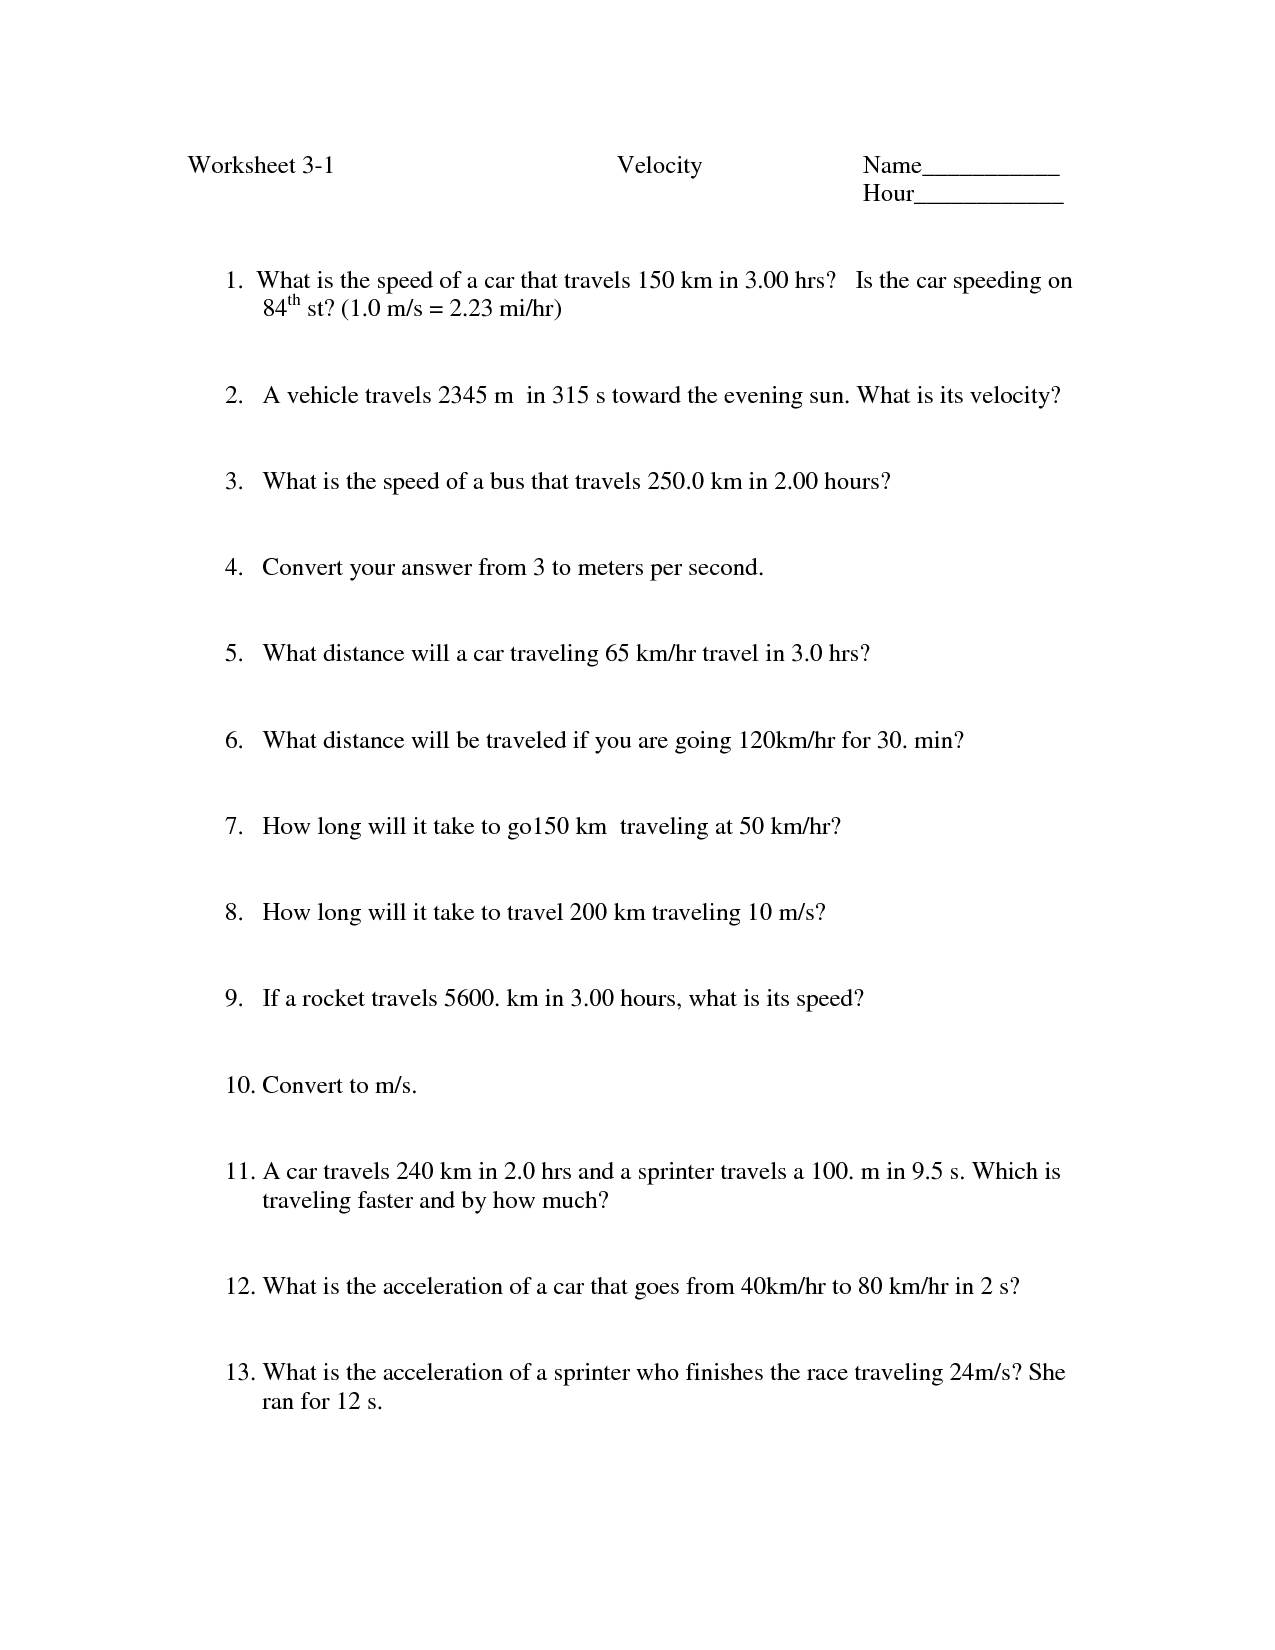 16-best-images-of-speed-and-motion-worksheet-speed-and-velocity-worksheets-middle-school